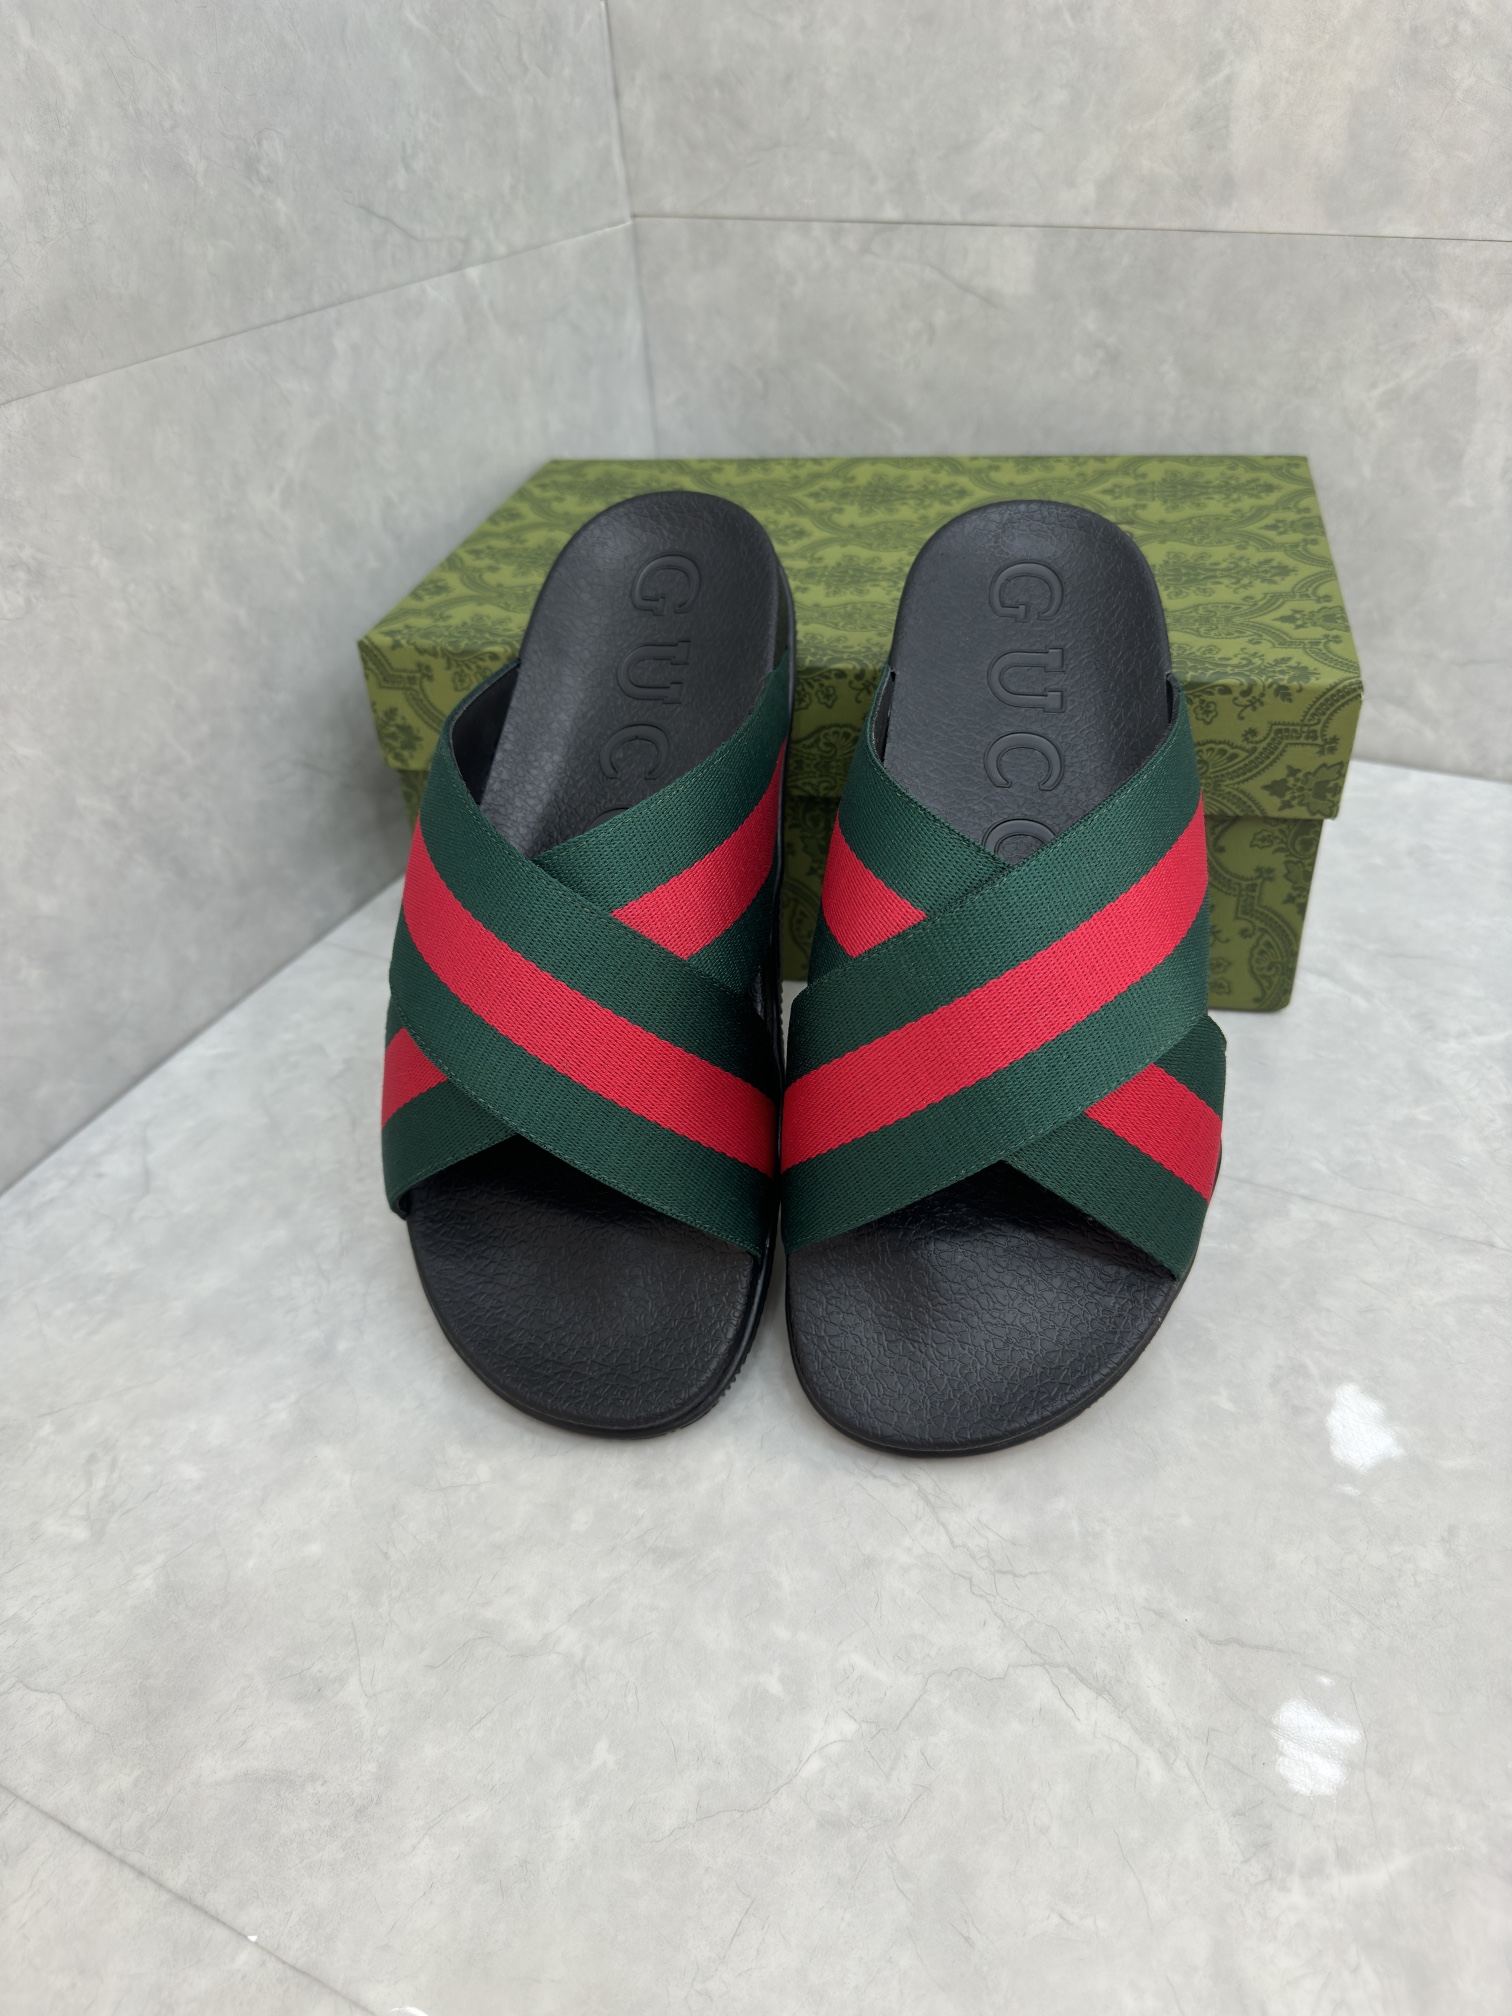 Gucci Shoes Sandals Slippers Green Red Unisex Rubber Sweatpants